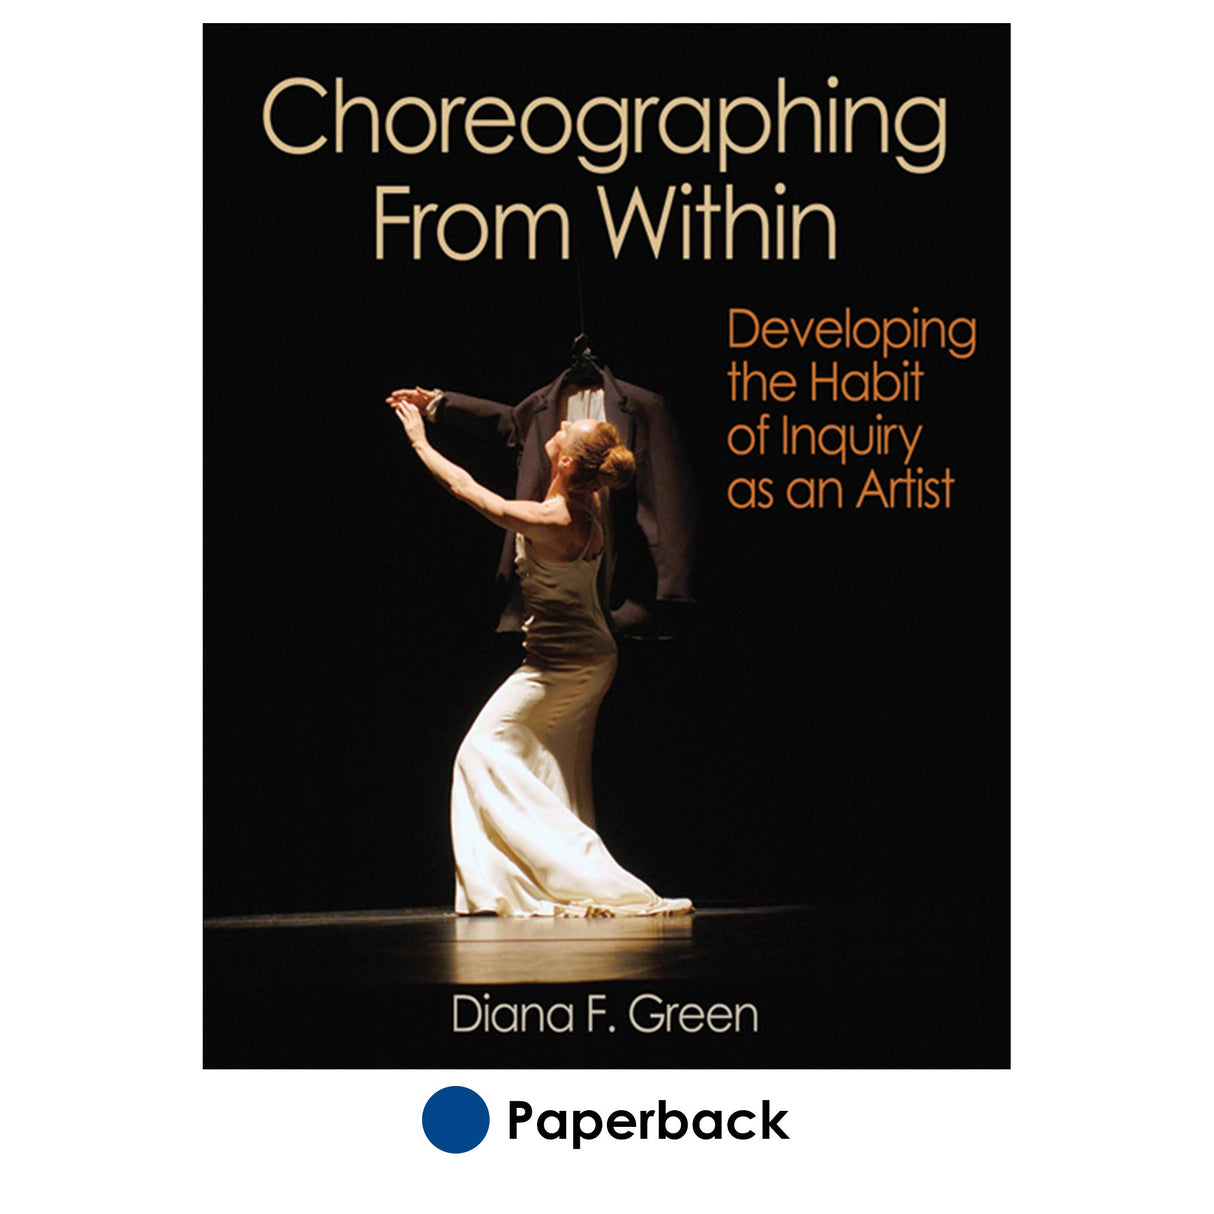 Choreographing From Within